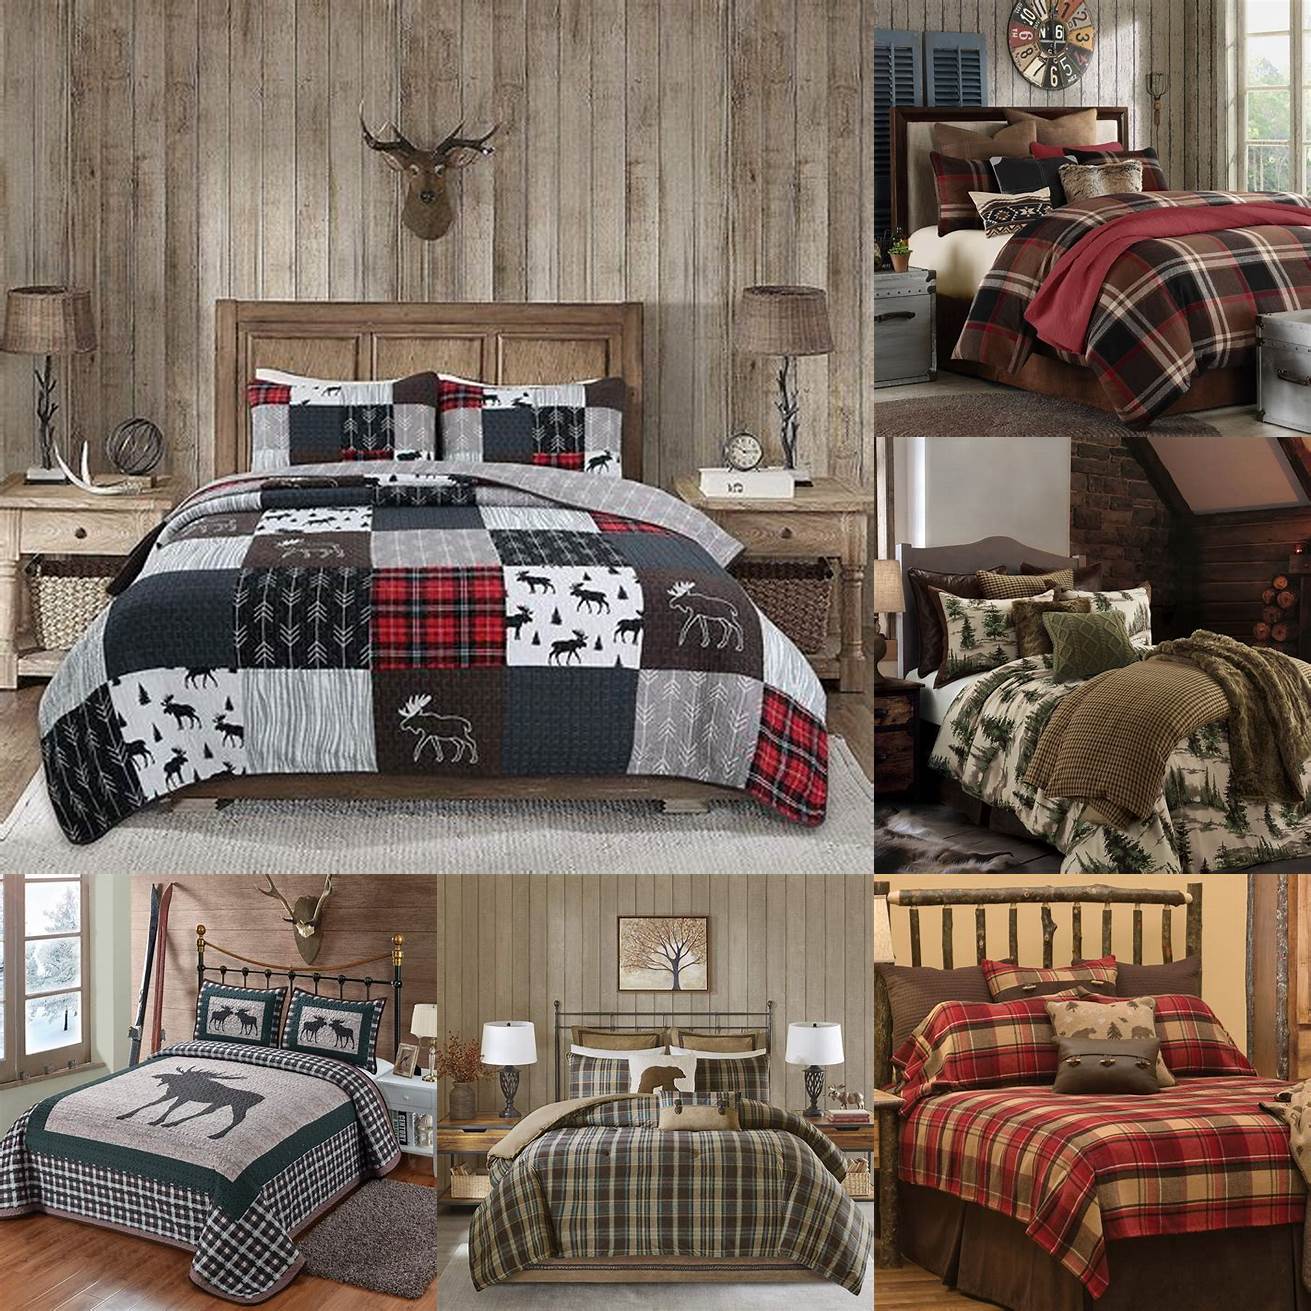 Plaid cabin bedding adds a touch of rustic charm to your bedroom